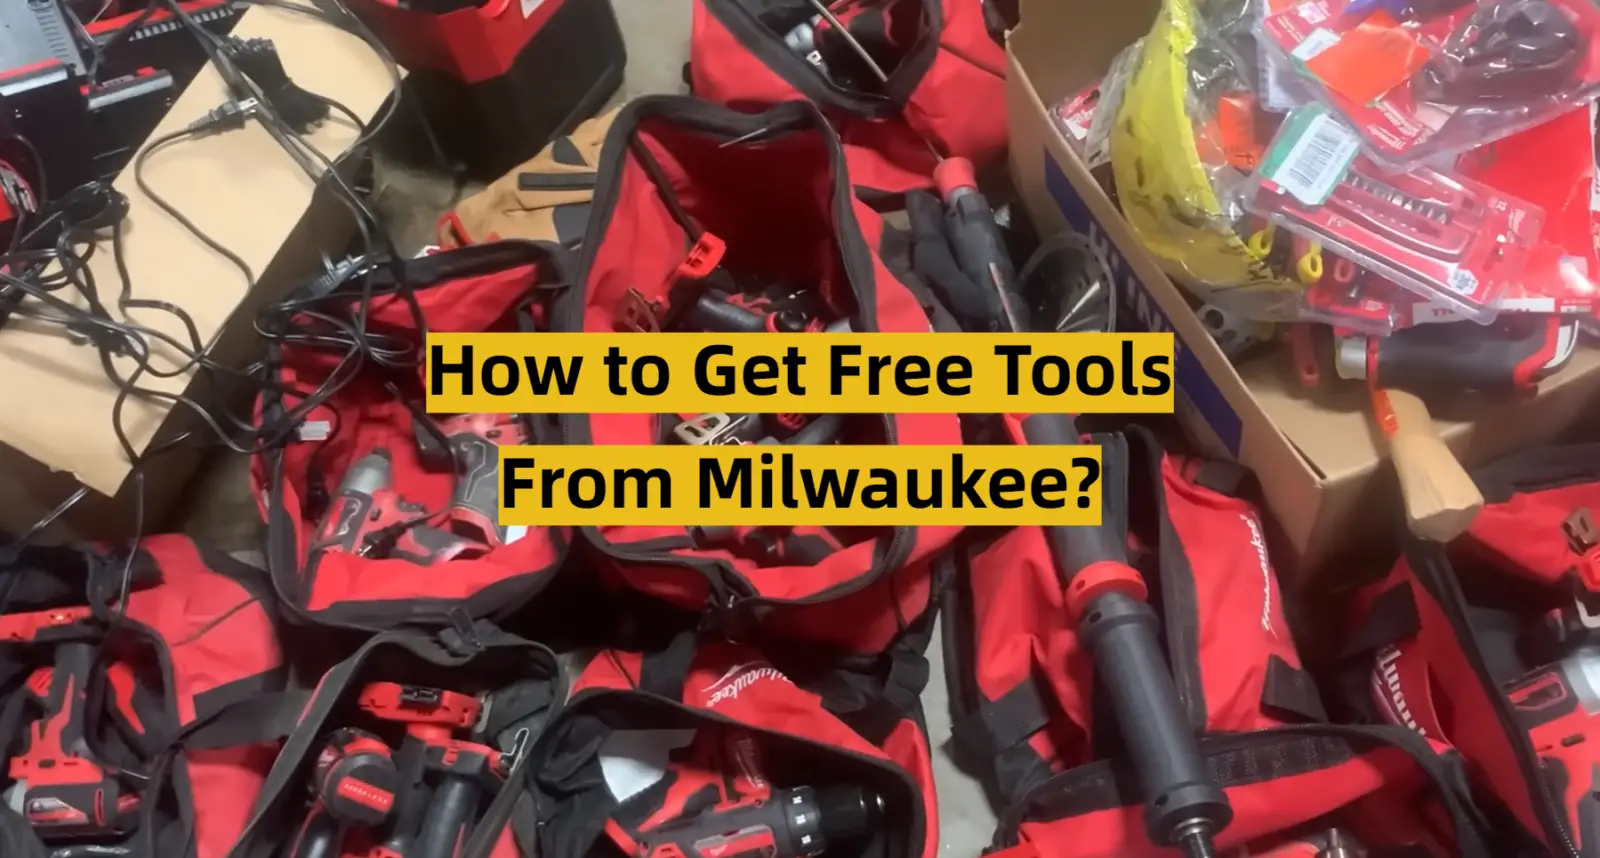 How to Get Free Tools From Milwaukee?